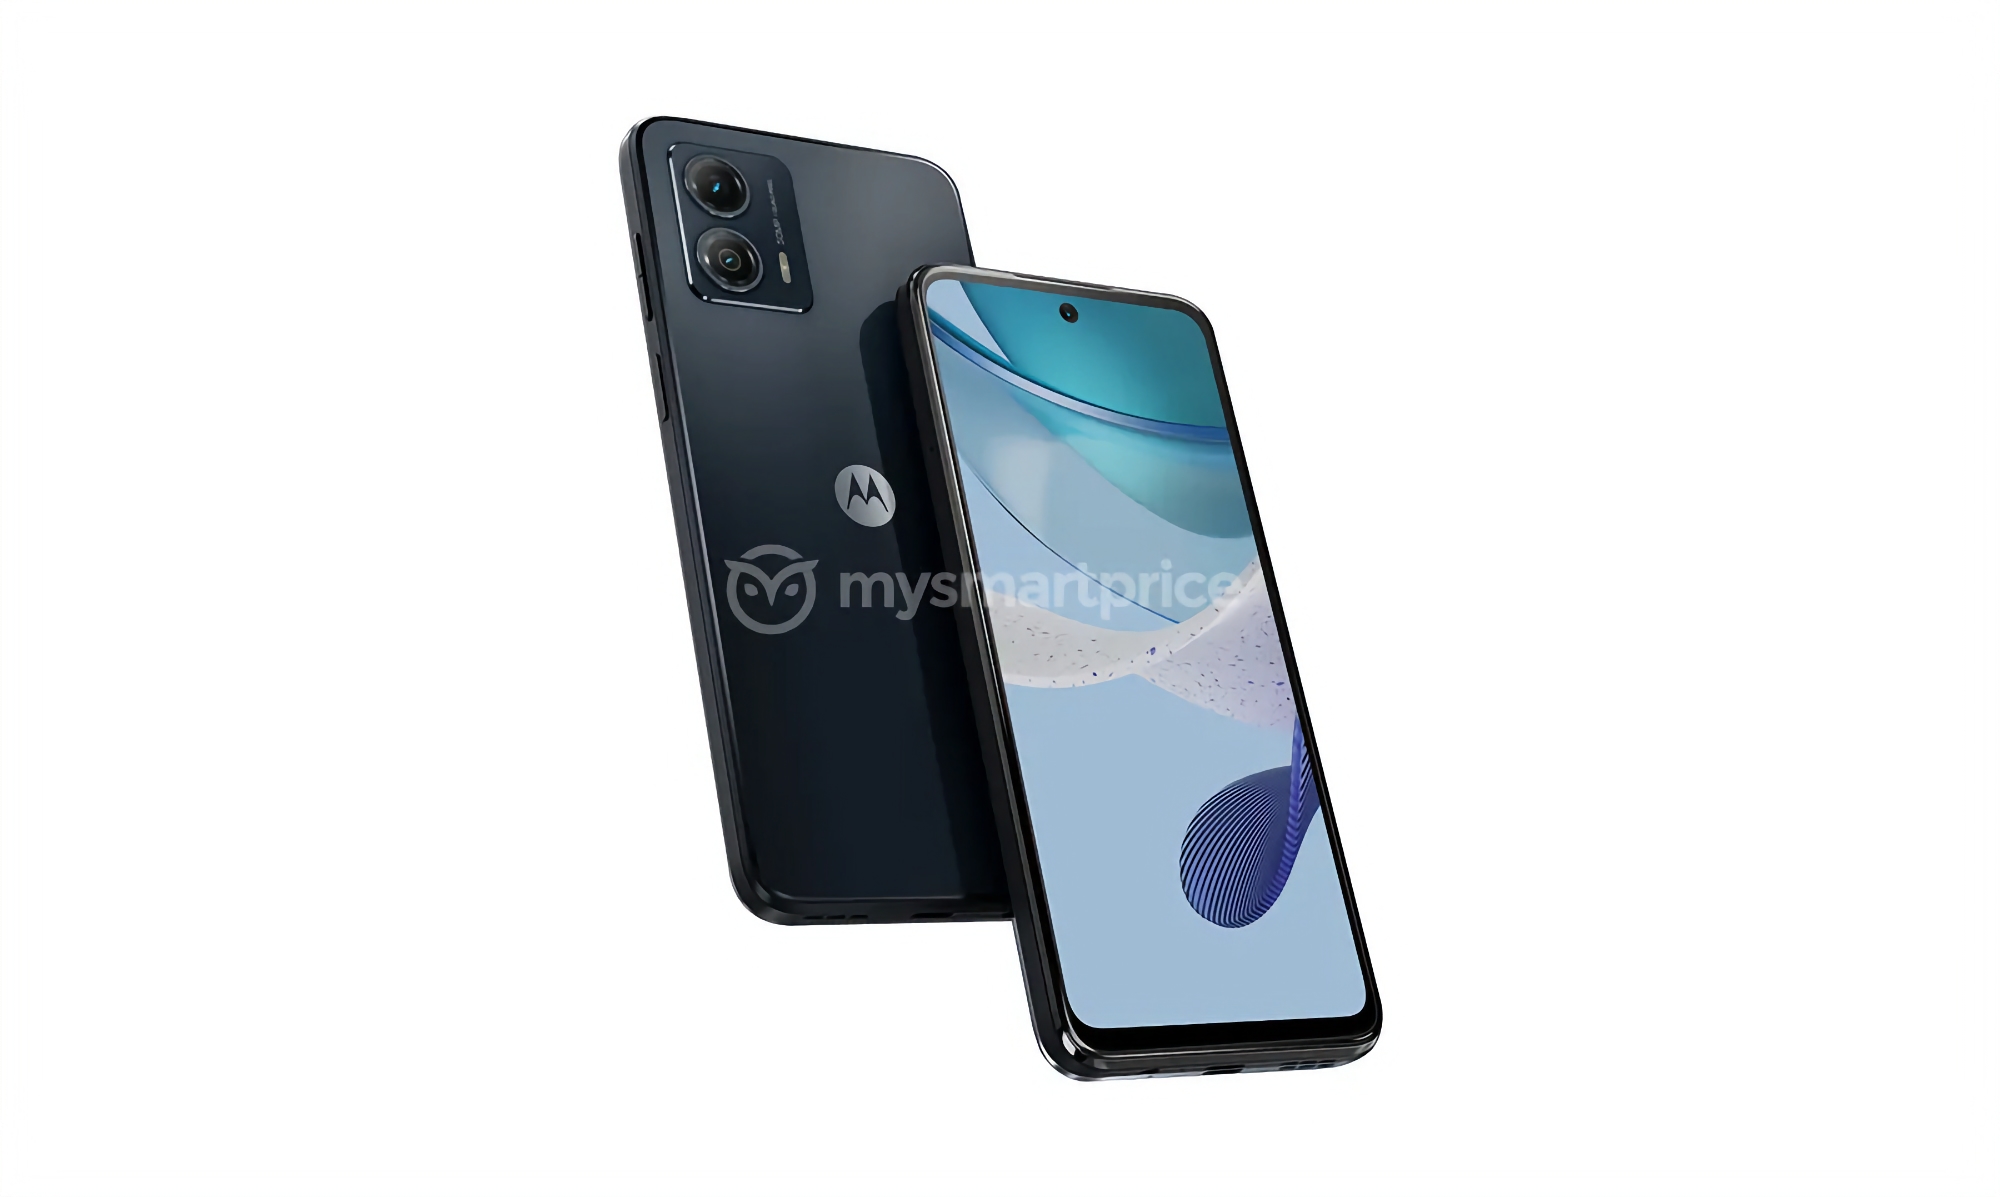 Motorola is preparing for release of a budget smartphones Moto G23 and Moto G13 in Europe, the new products will cost from 159 euros